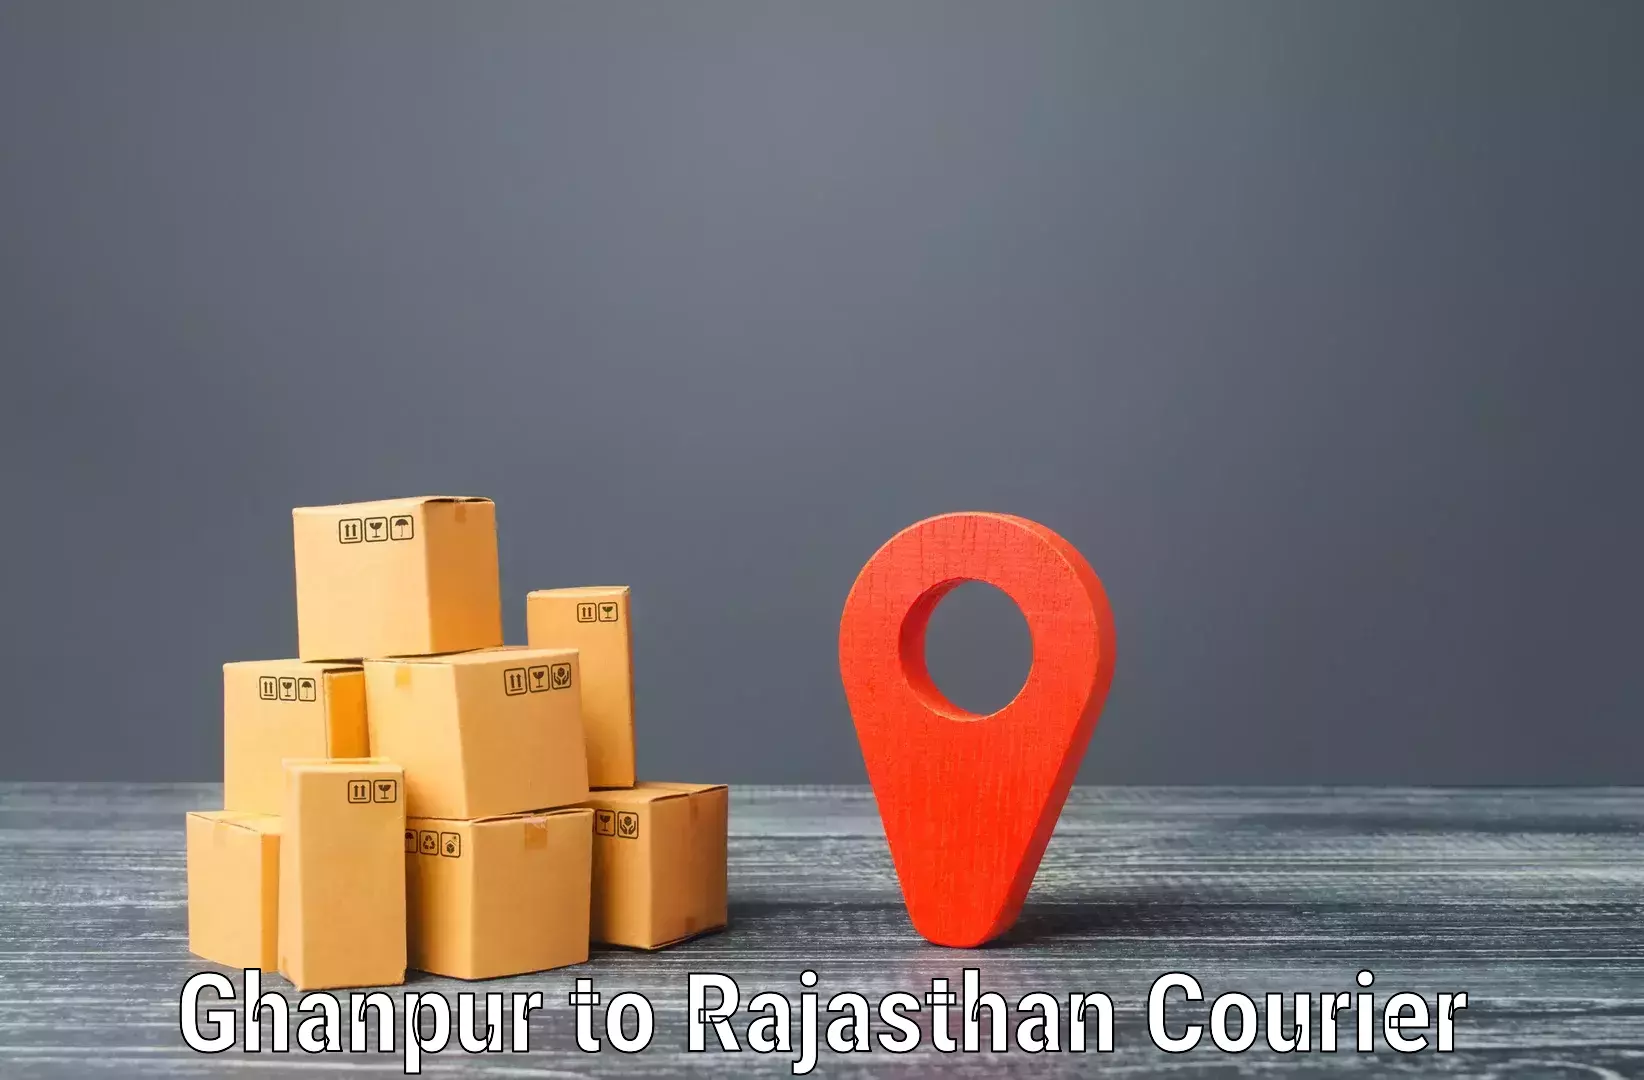 On-call courier service Ghanpur to Rajasthan